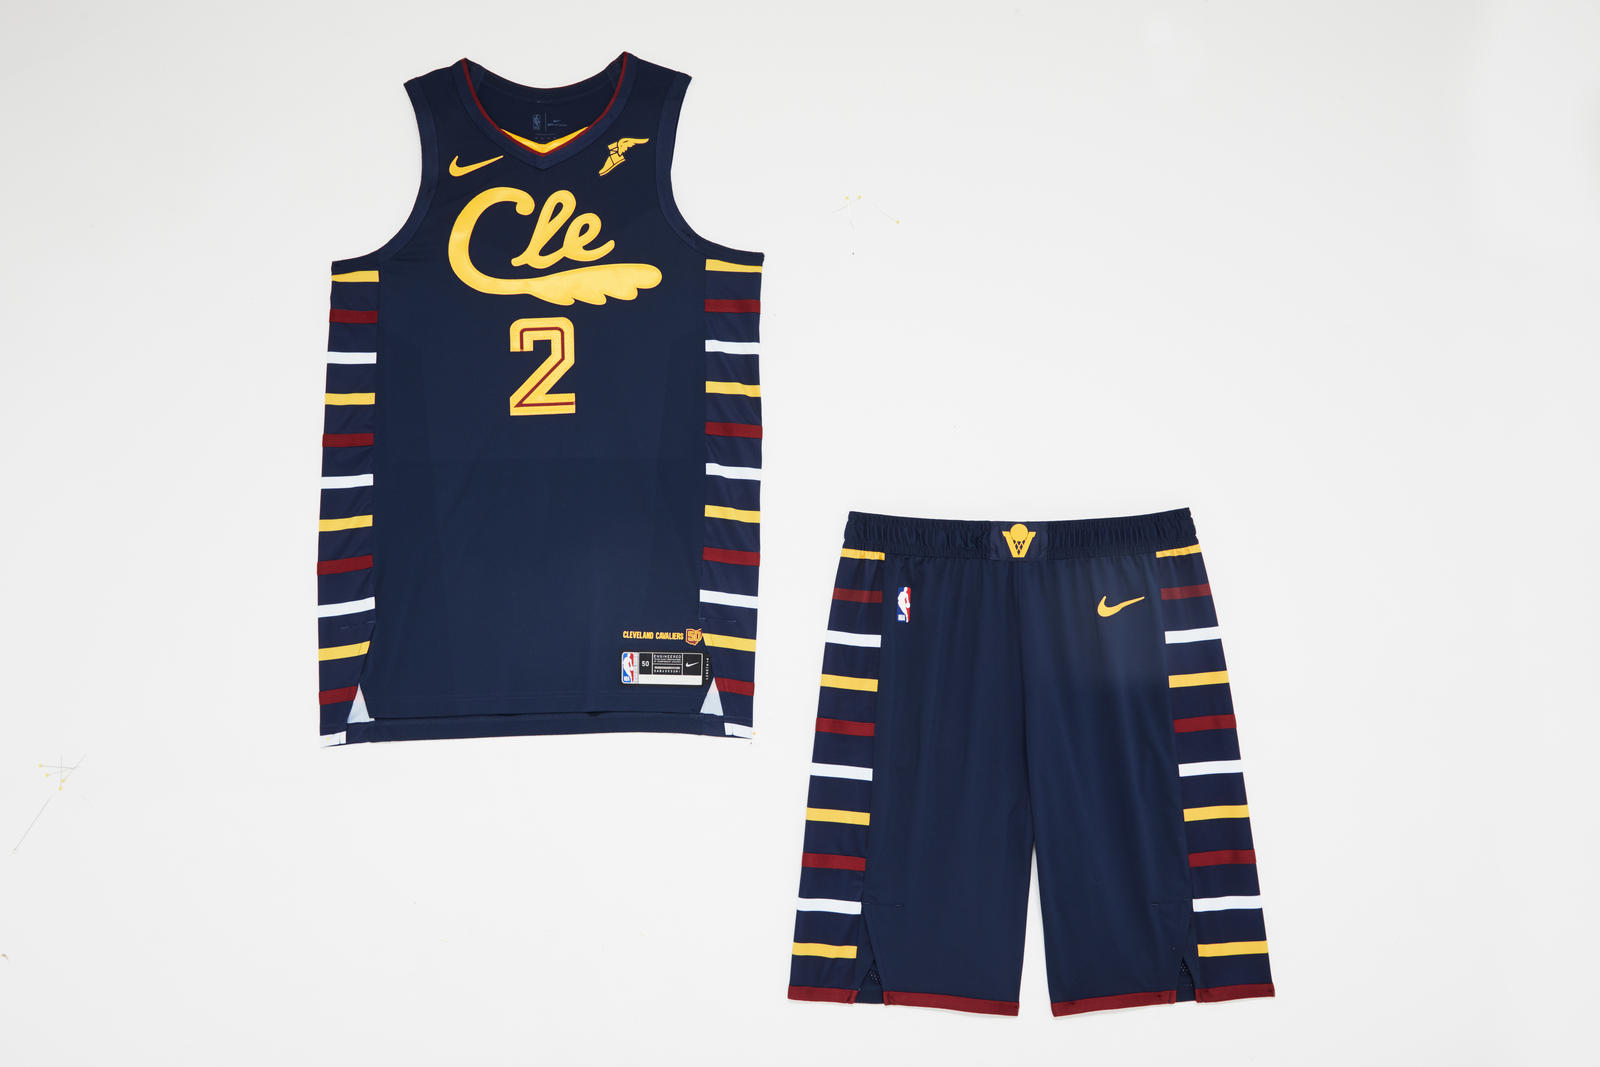 Nike's 2018/19 NBA “City Edition” Uniforms Are Here, Paying